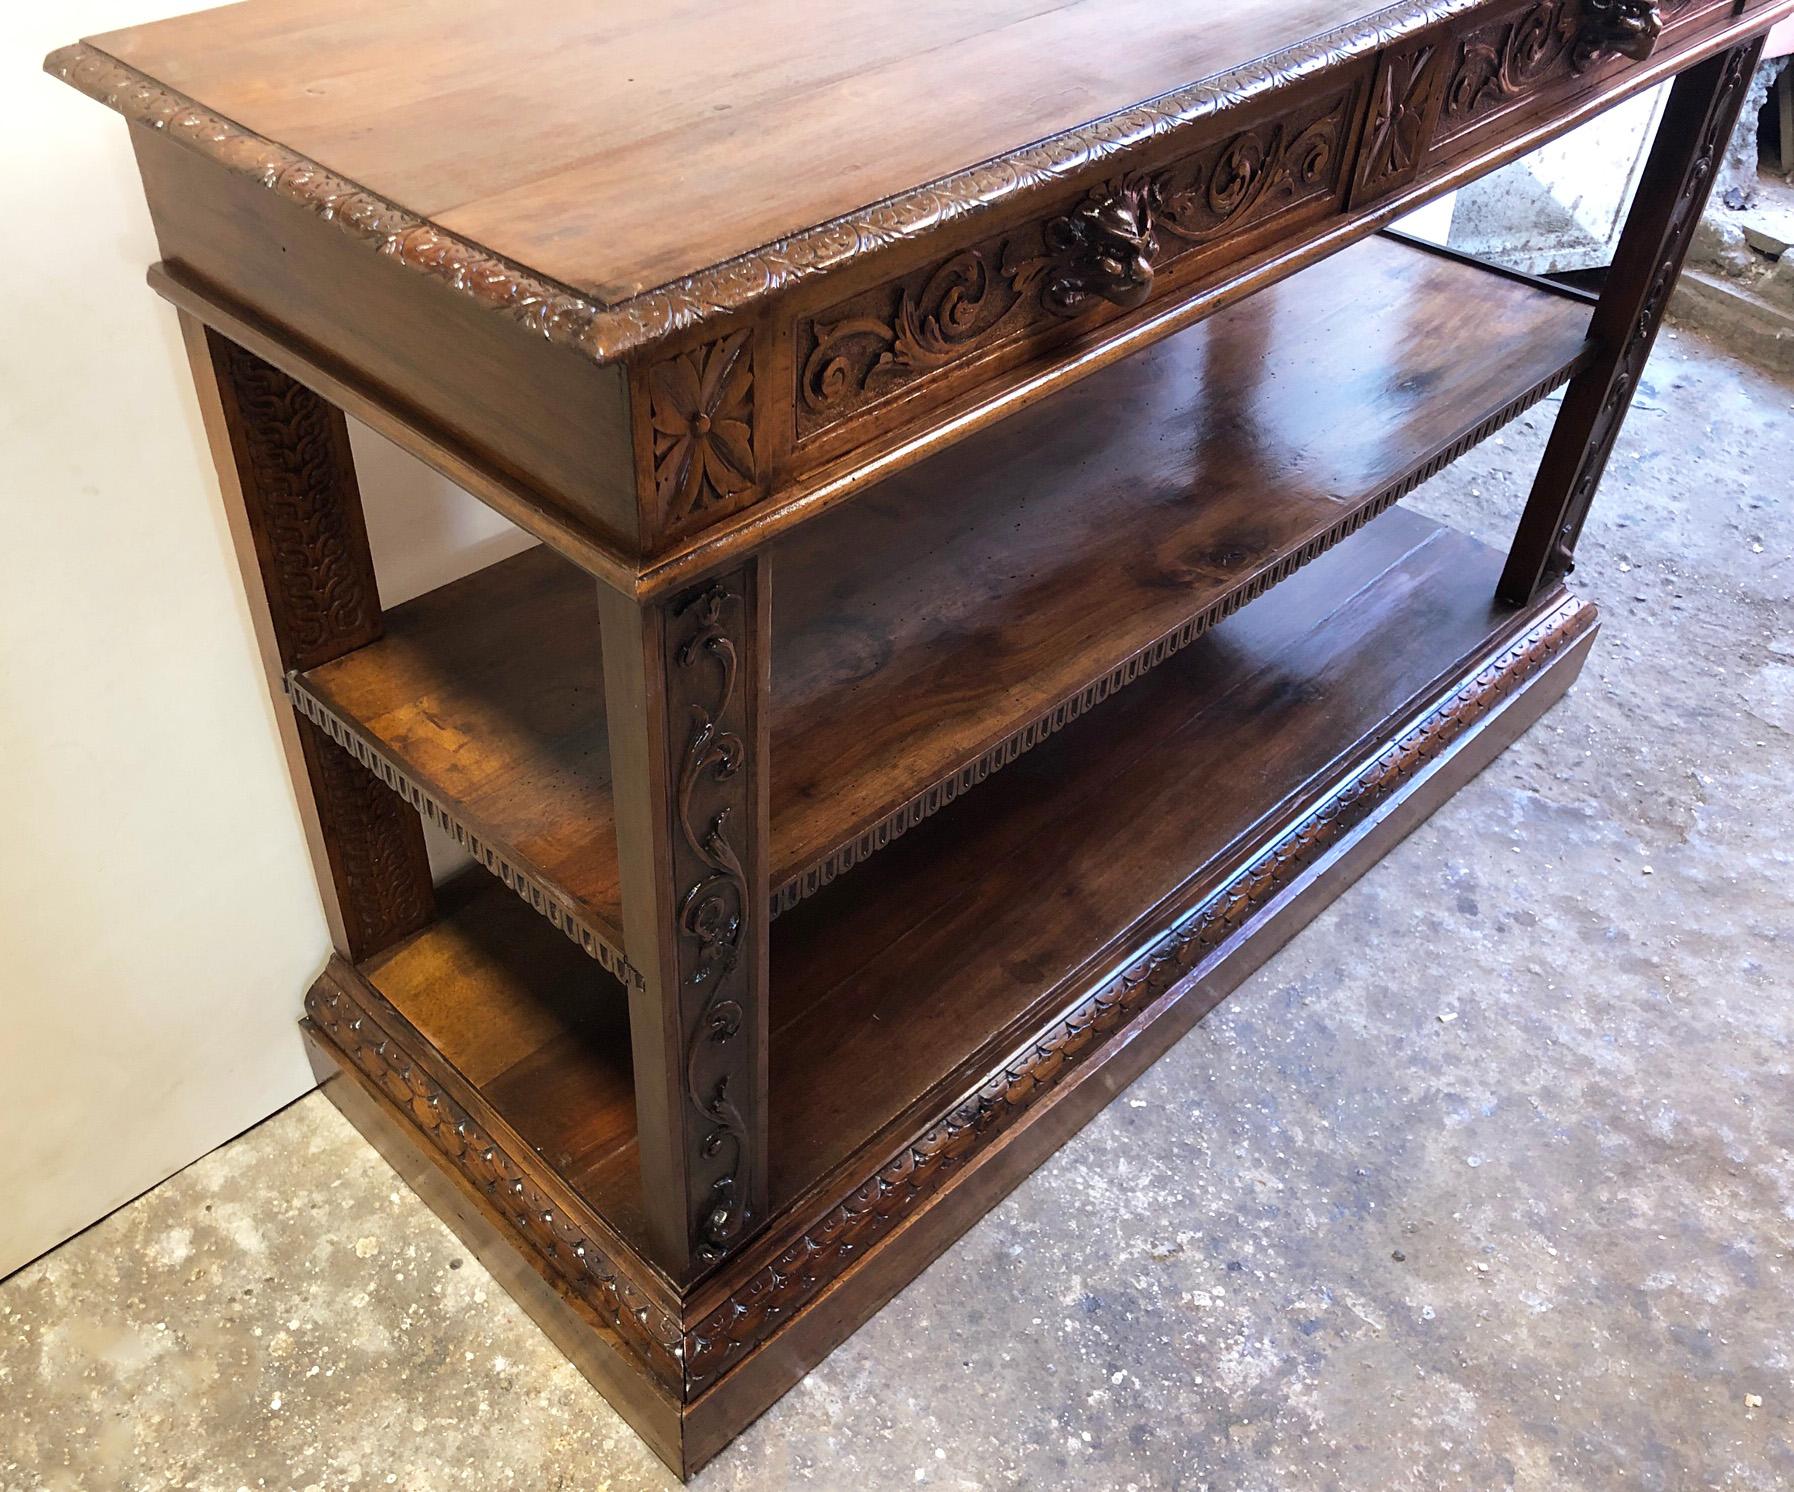 Fir 19th Century Italian Console Hand-Carved Solid Walnut Two Drawers Natural Color For Sale